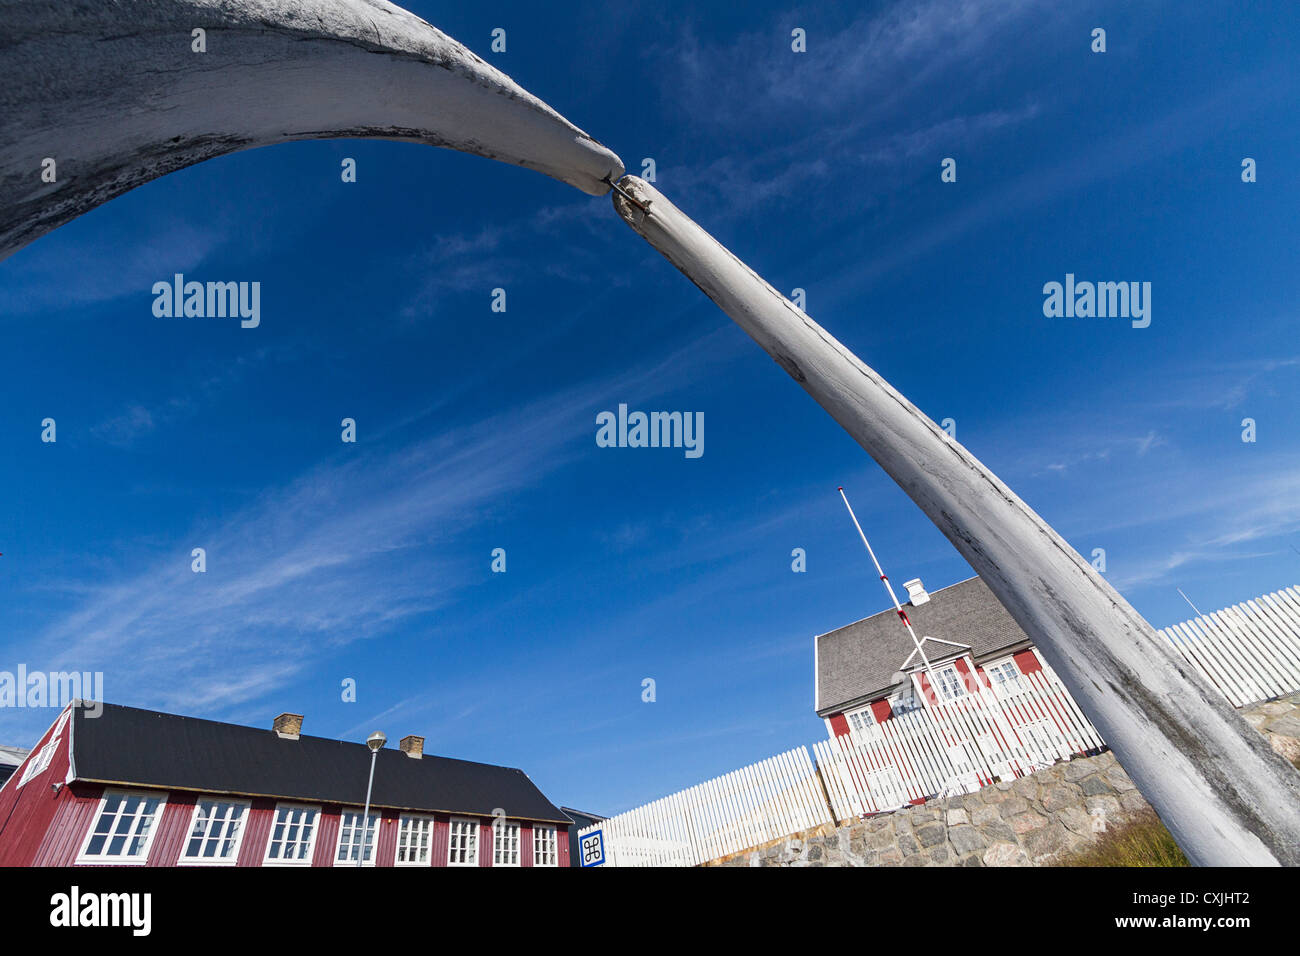 Whale bones outline Knud Rasmussen museum building at Ilulissat, Greenland. Stock Photo